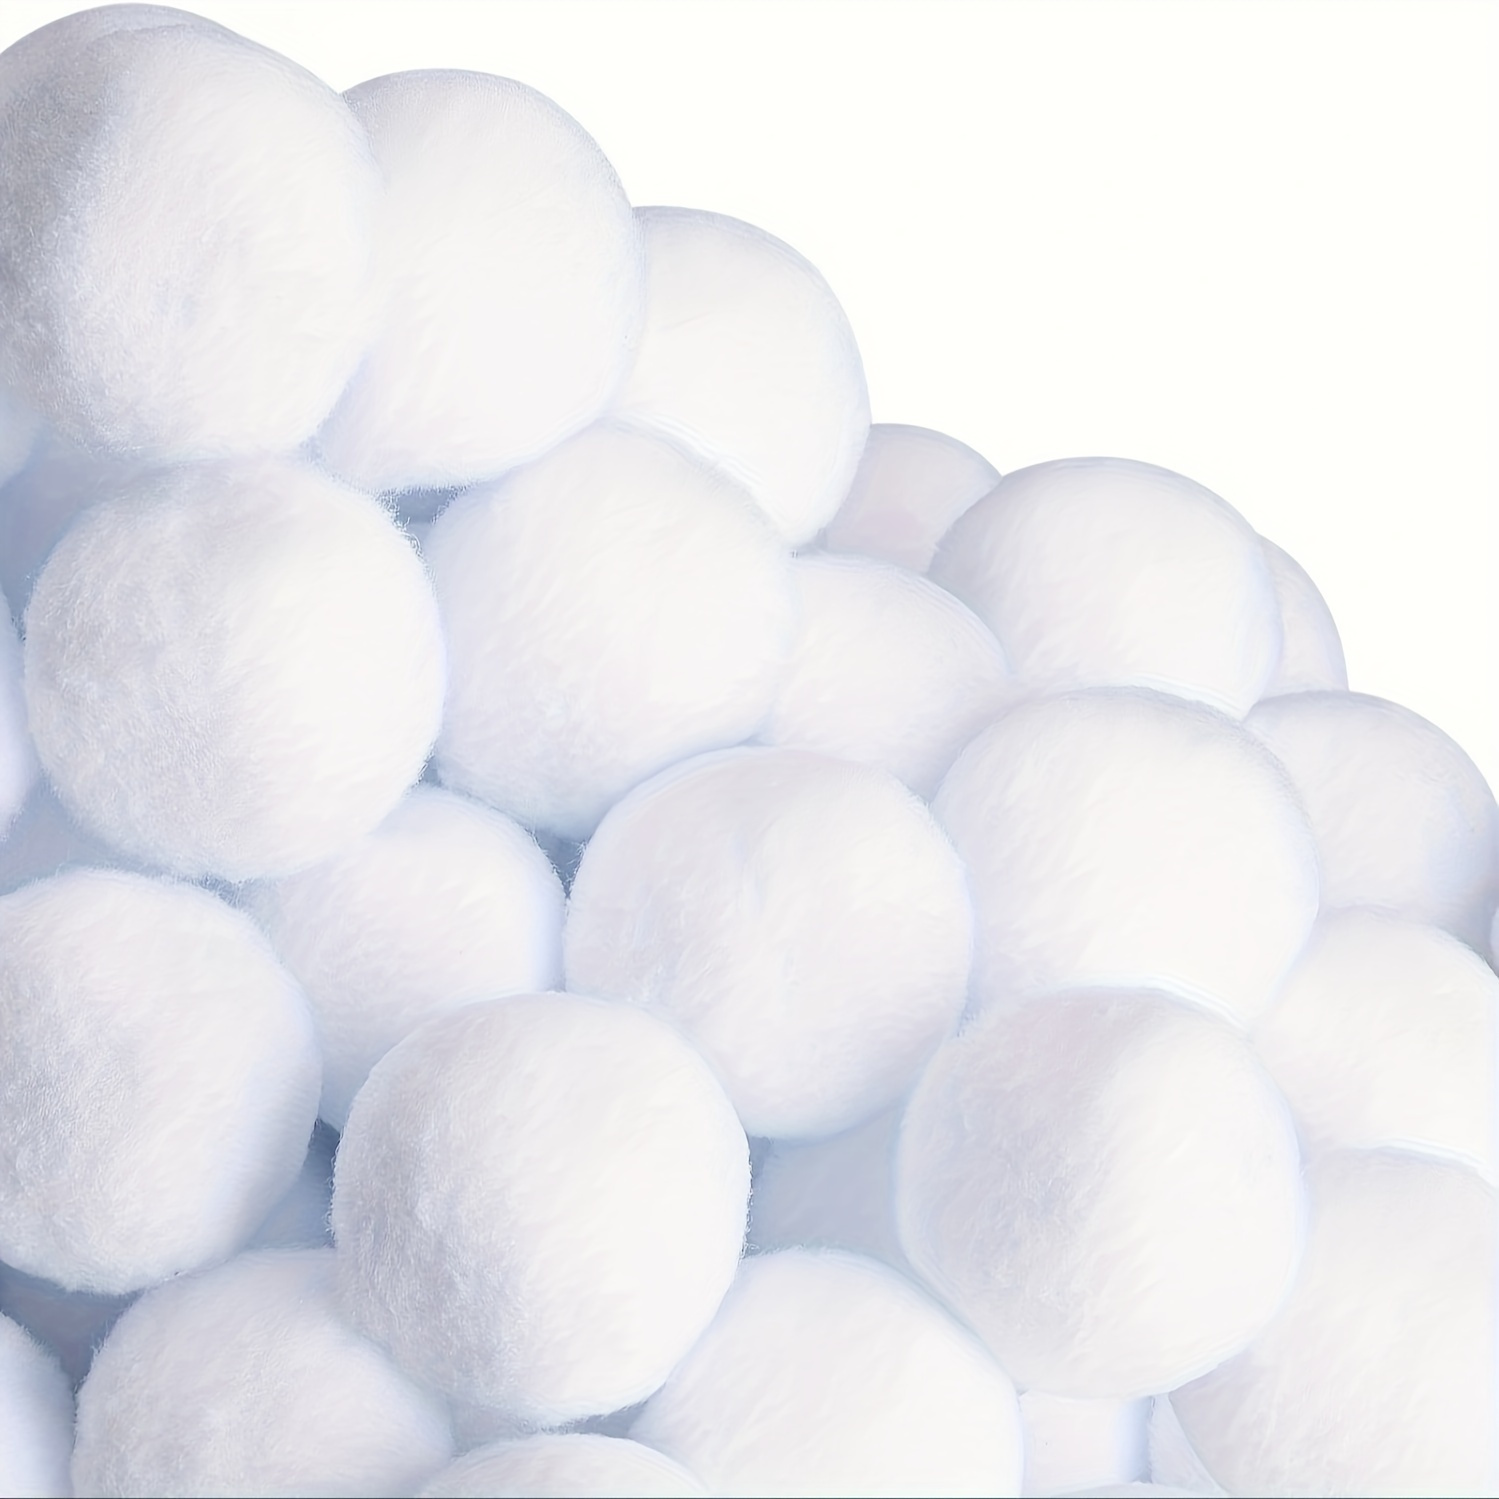 40 Pack Artificial Snowballs Fake Snowball for Snowball Fight Indoor  Outdoor Kids Snow Toy for Throwing Snowball Fight Game